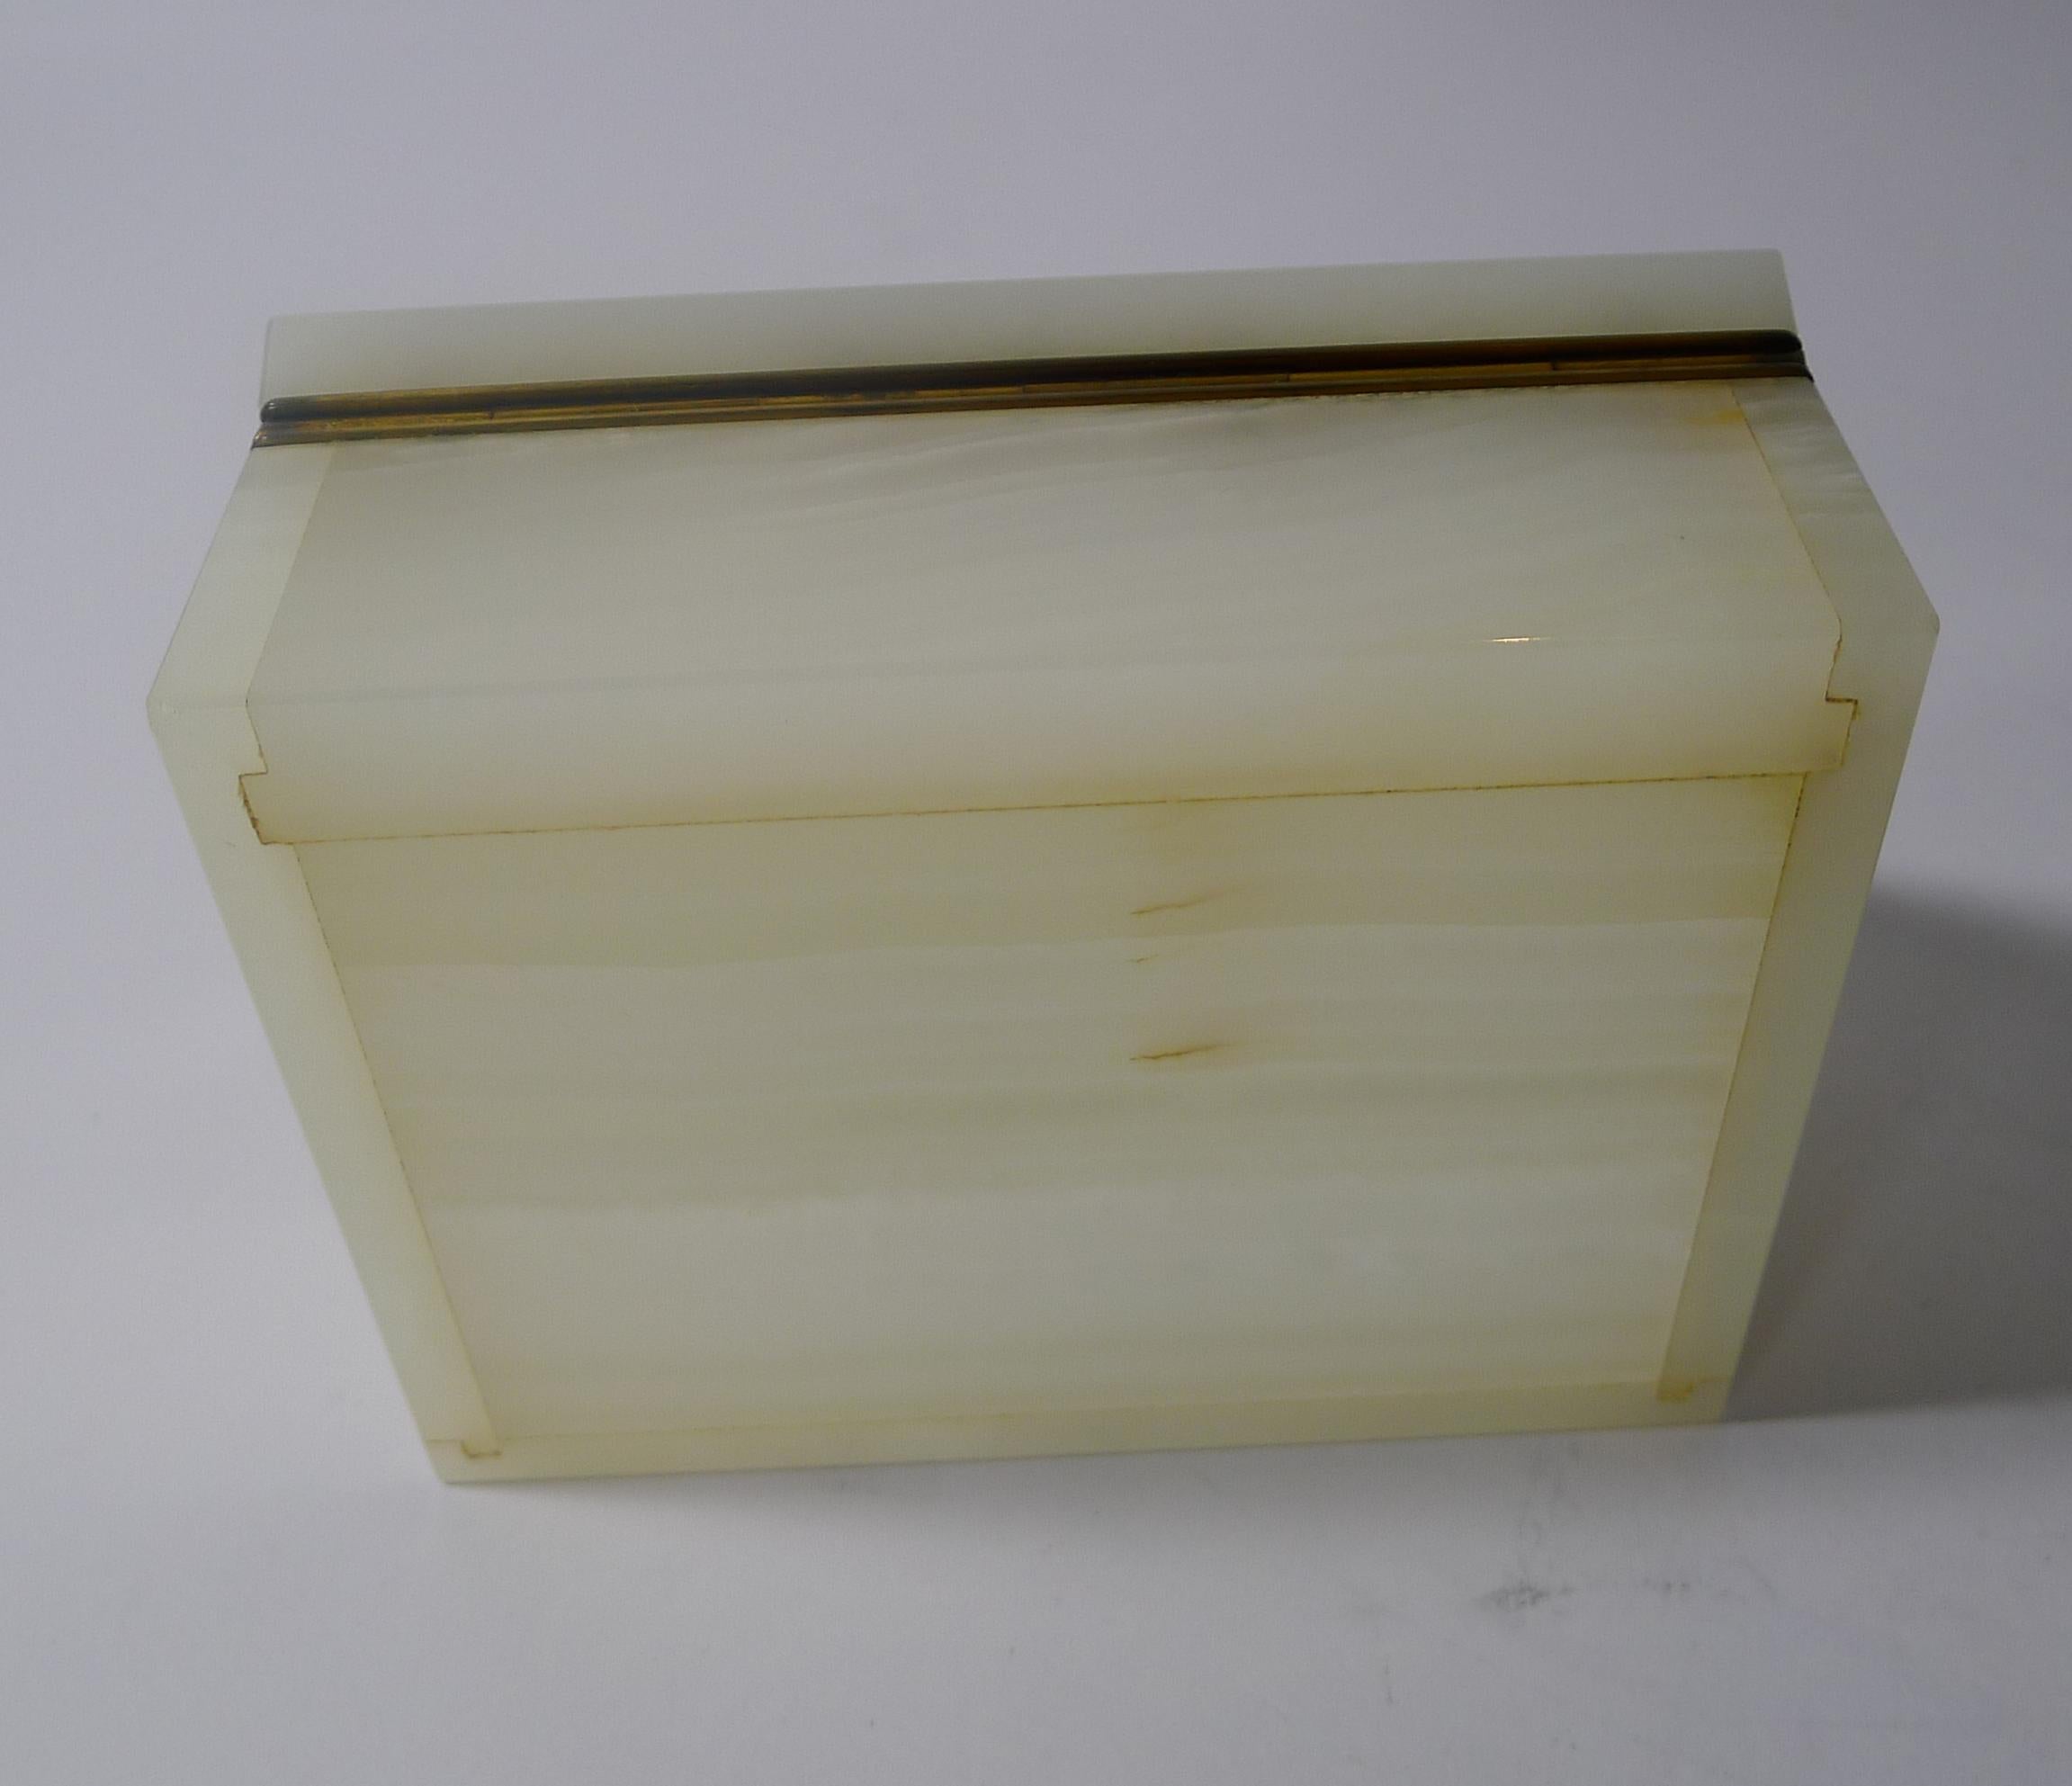 A very elegant box in white Onyx with a flourish of Malachite sitting below the lift at the front.

The box opens to reveal the signature for the well renowned London Patentees and Makers, George Betjemann. Marked on the gilded hinge, Betjemann's